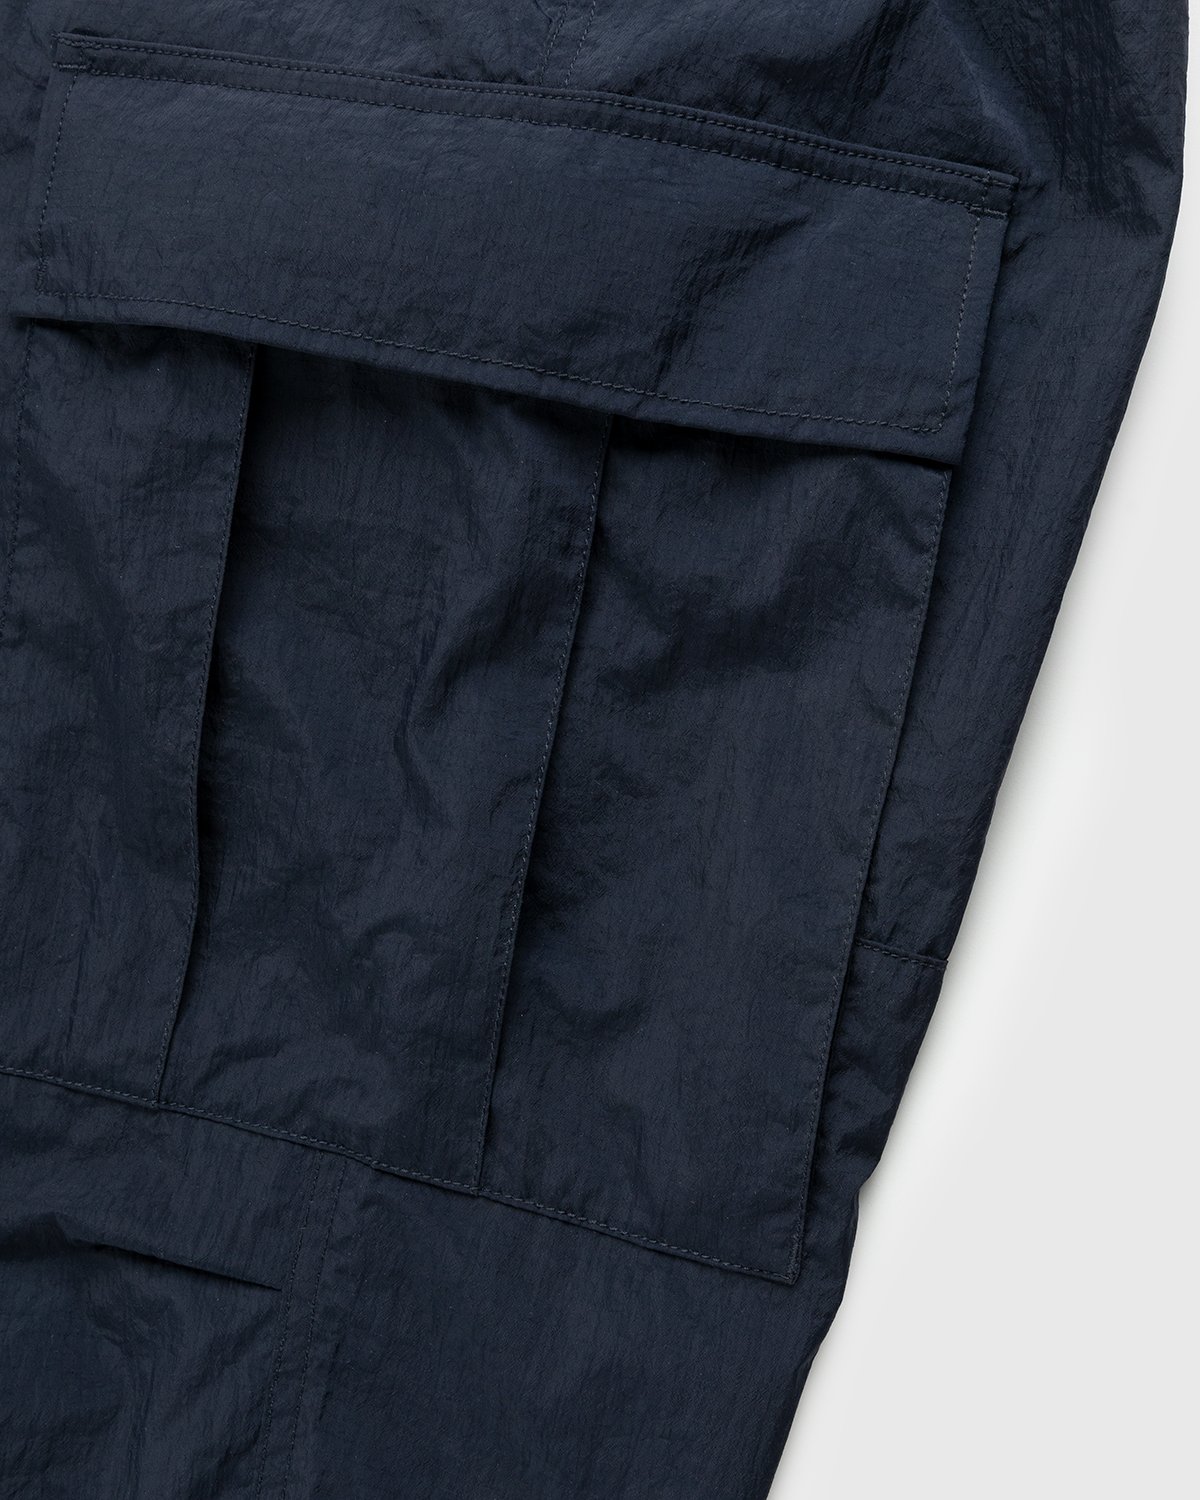 Highsnobiety - Water-Resistant Ripstop Cargo Pants Blue - Clothing - Blue - Image 6